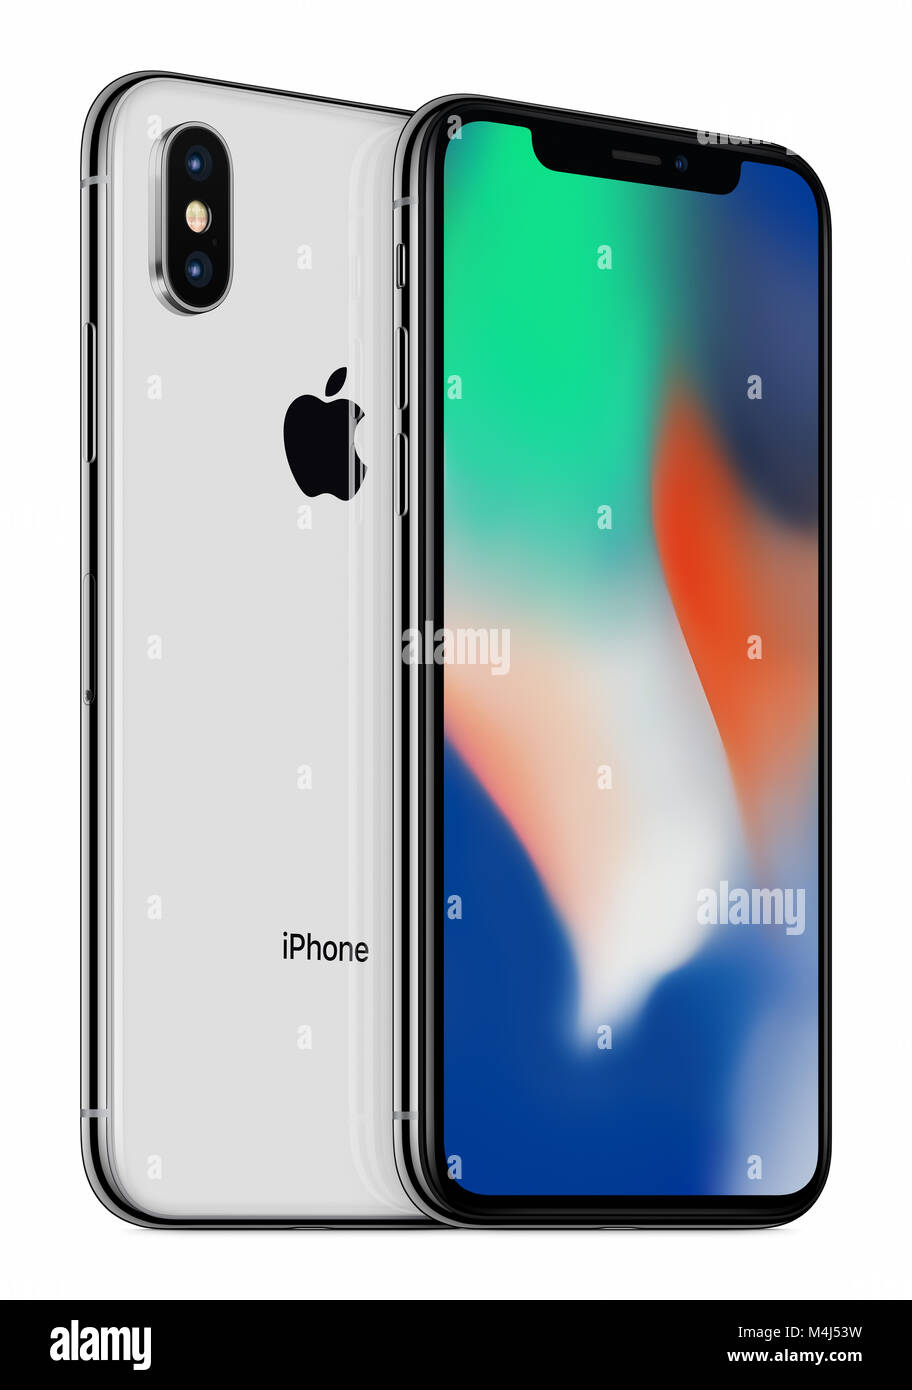 Turned Silver Apple iPhone X mockup front side and back side one above the other. Stock Photo